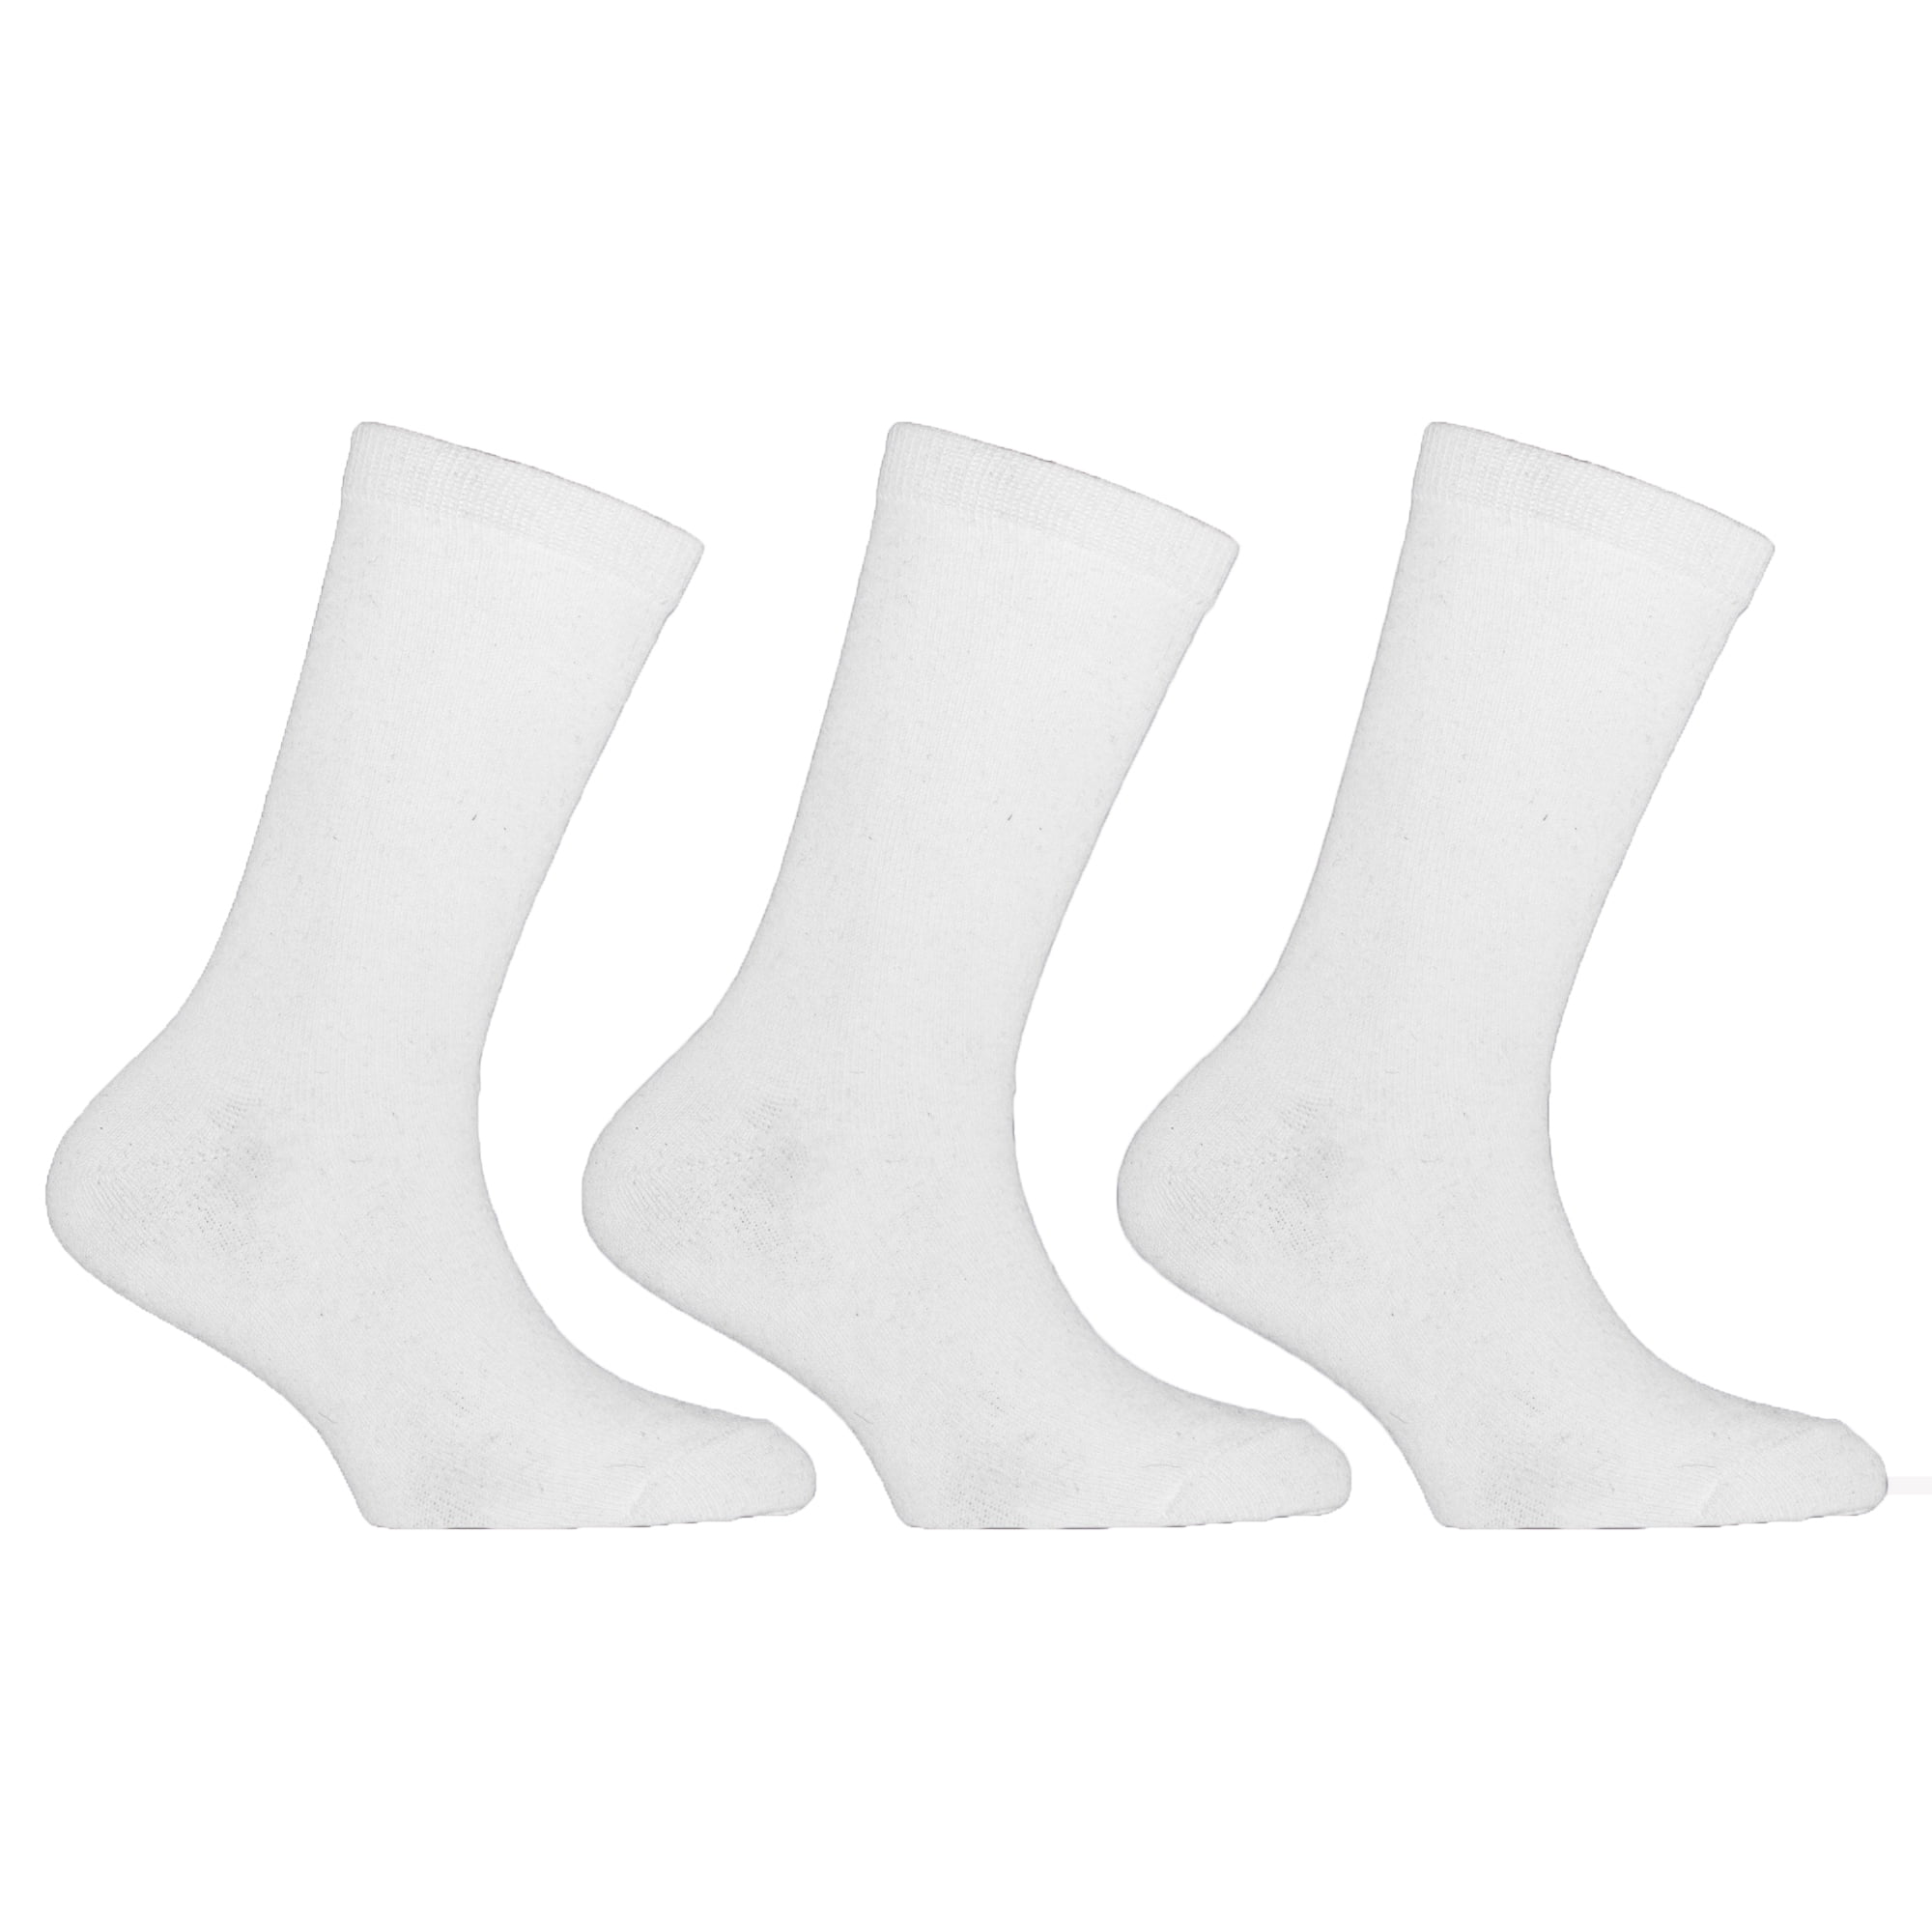 Boys School Ankle High Socks Pack Of 3 Cotton Rich Back To School 6-16 Years